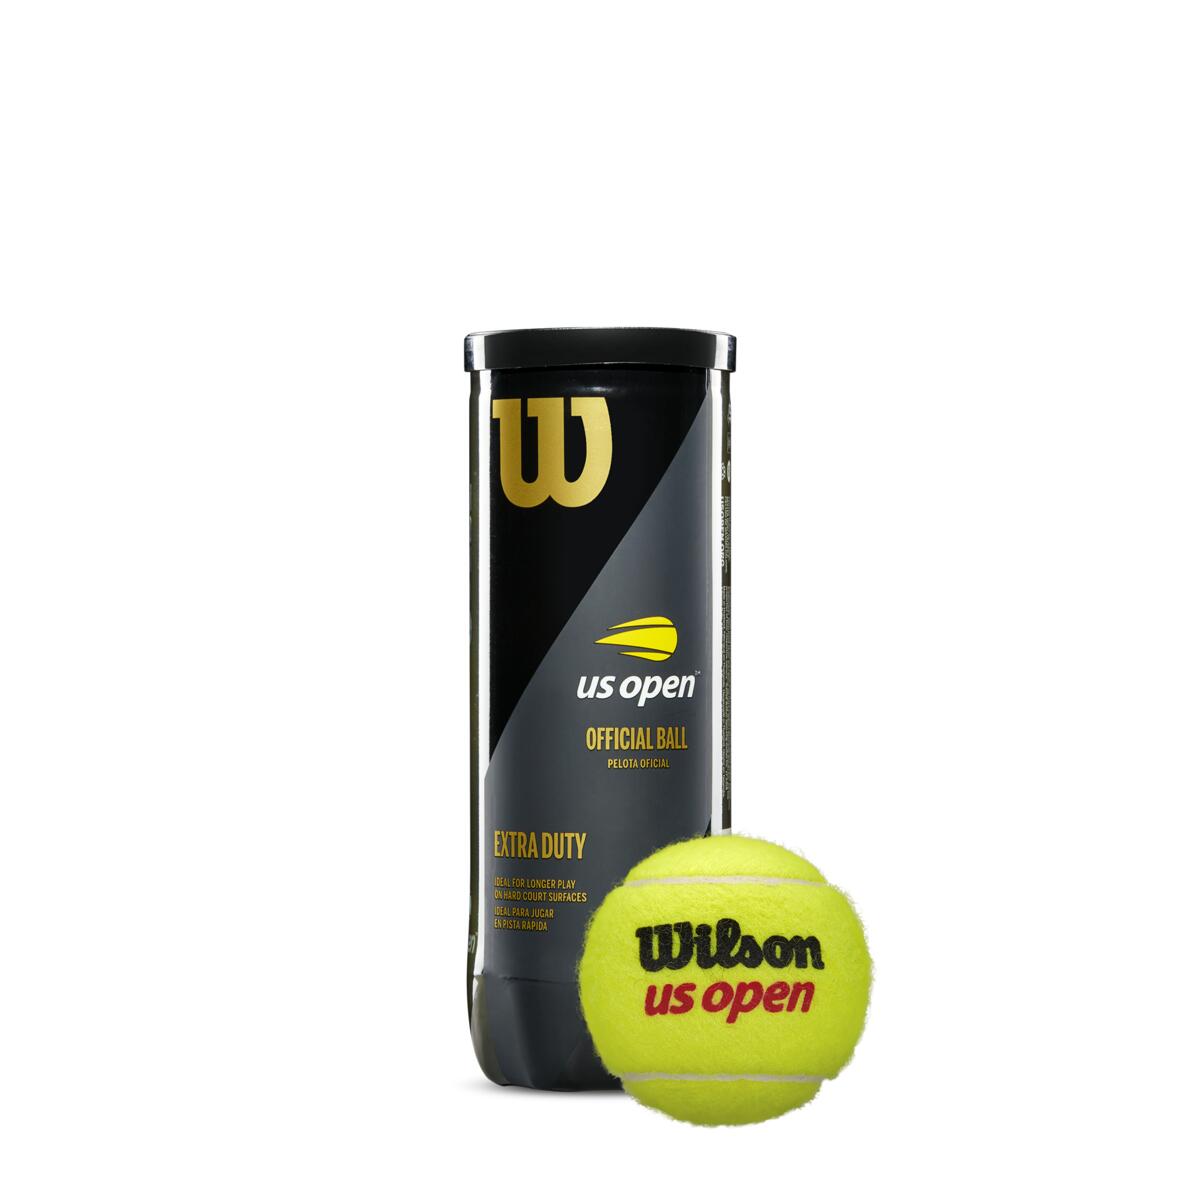 Wilson Us Open Extra Duty - Individual Can (3 Balls)